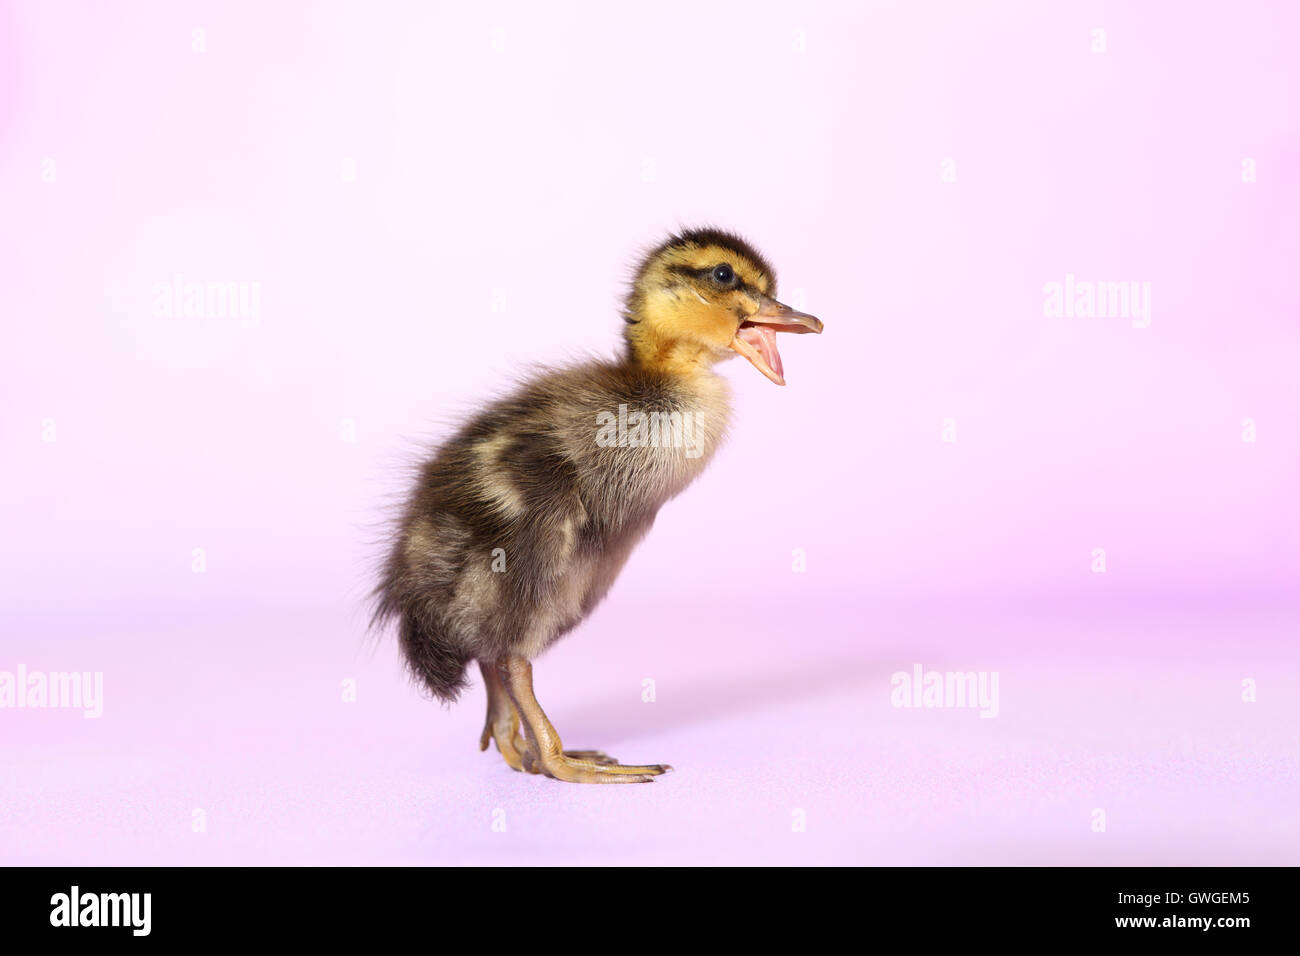 Indian Runner Duck. Duckling standing while quacking. Studio picture against a blue background. Germany Stock Photo